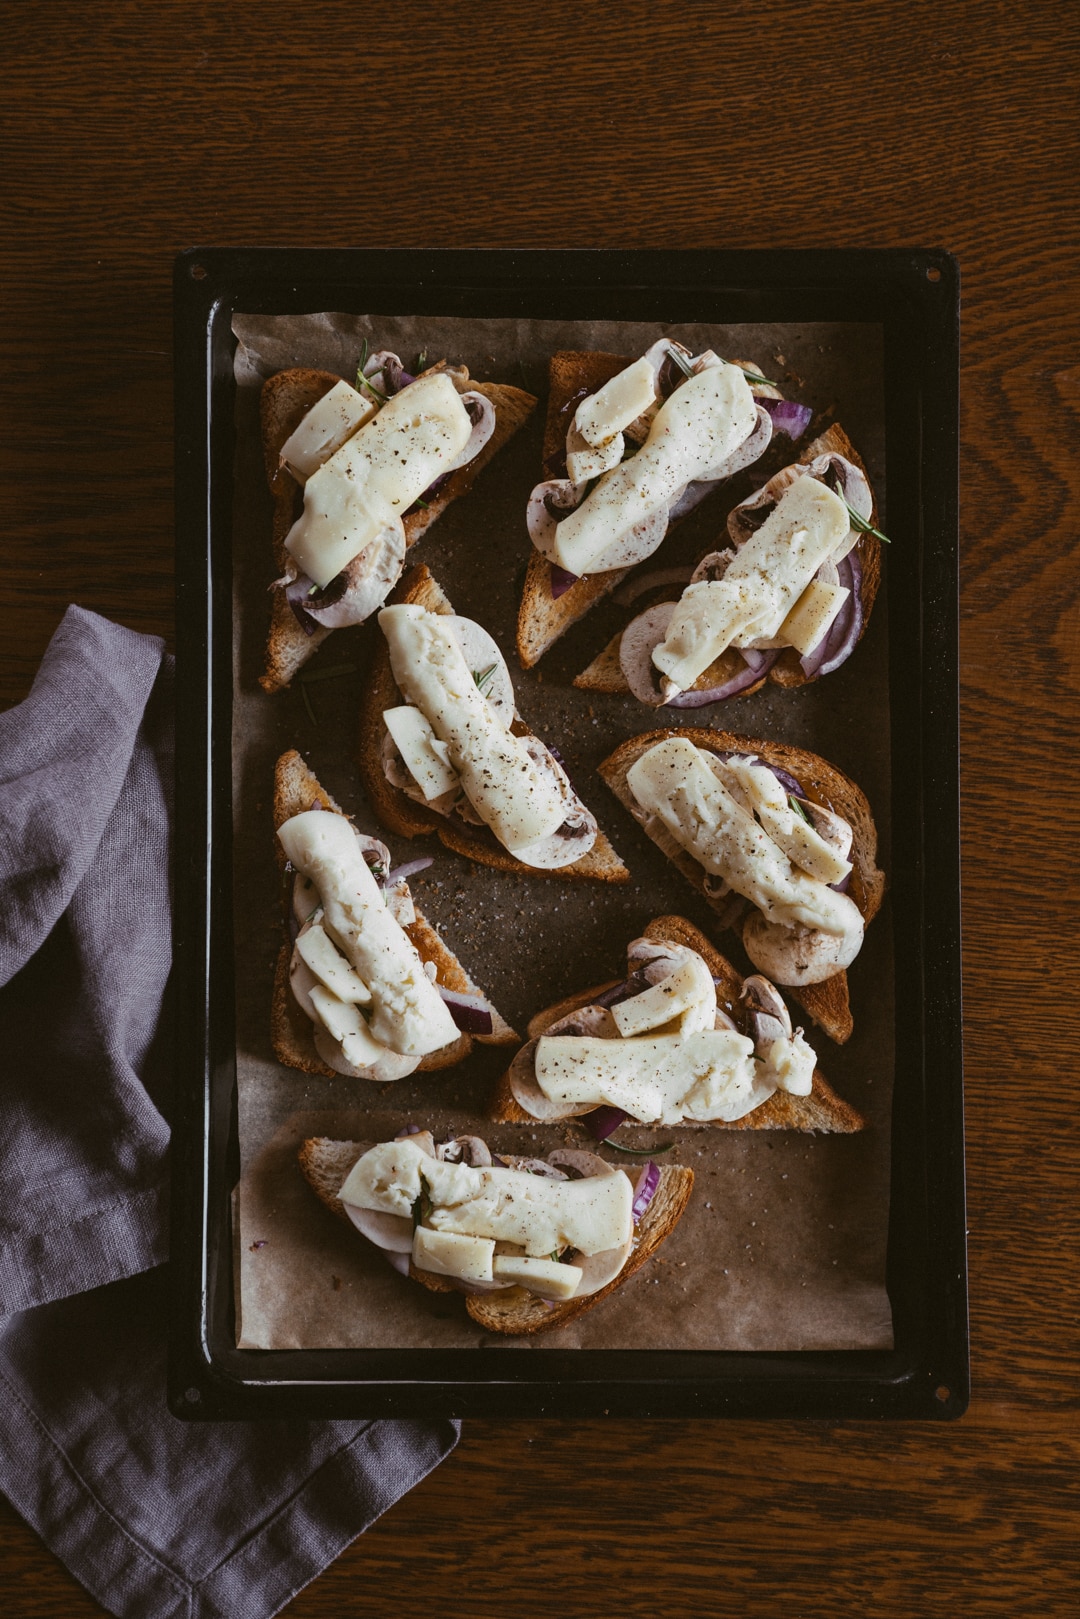 Hot Sweet And Savoury Crostini With Cheese And Mushrooms